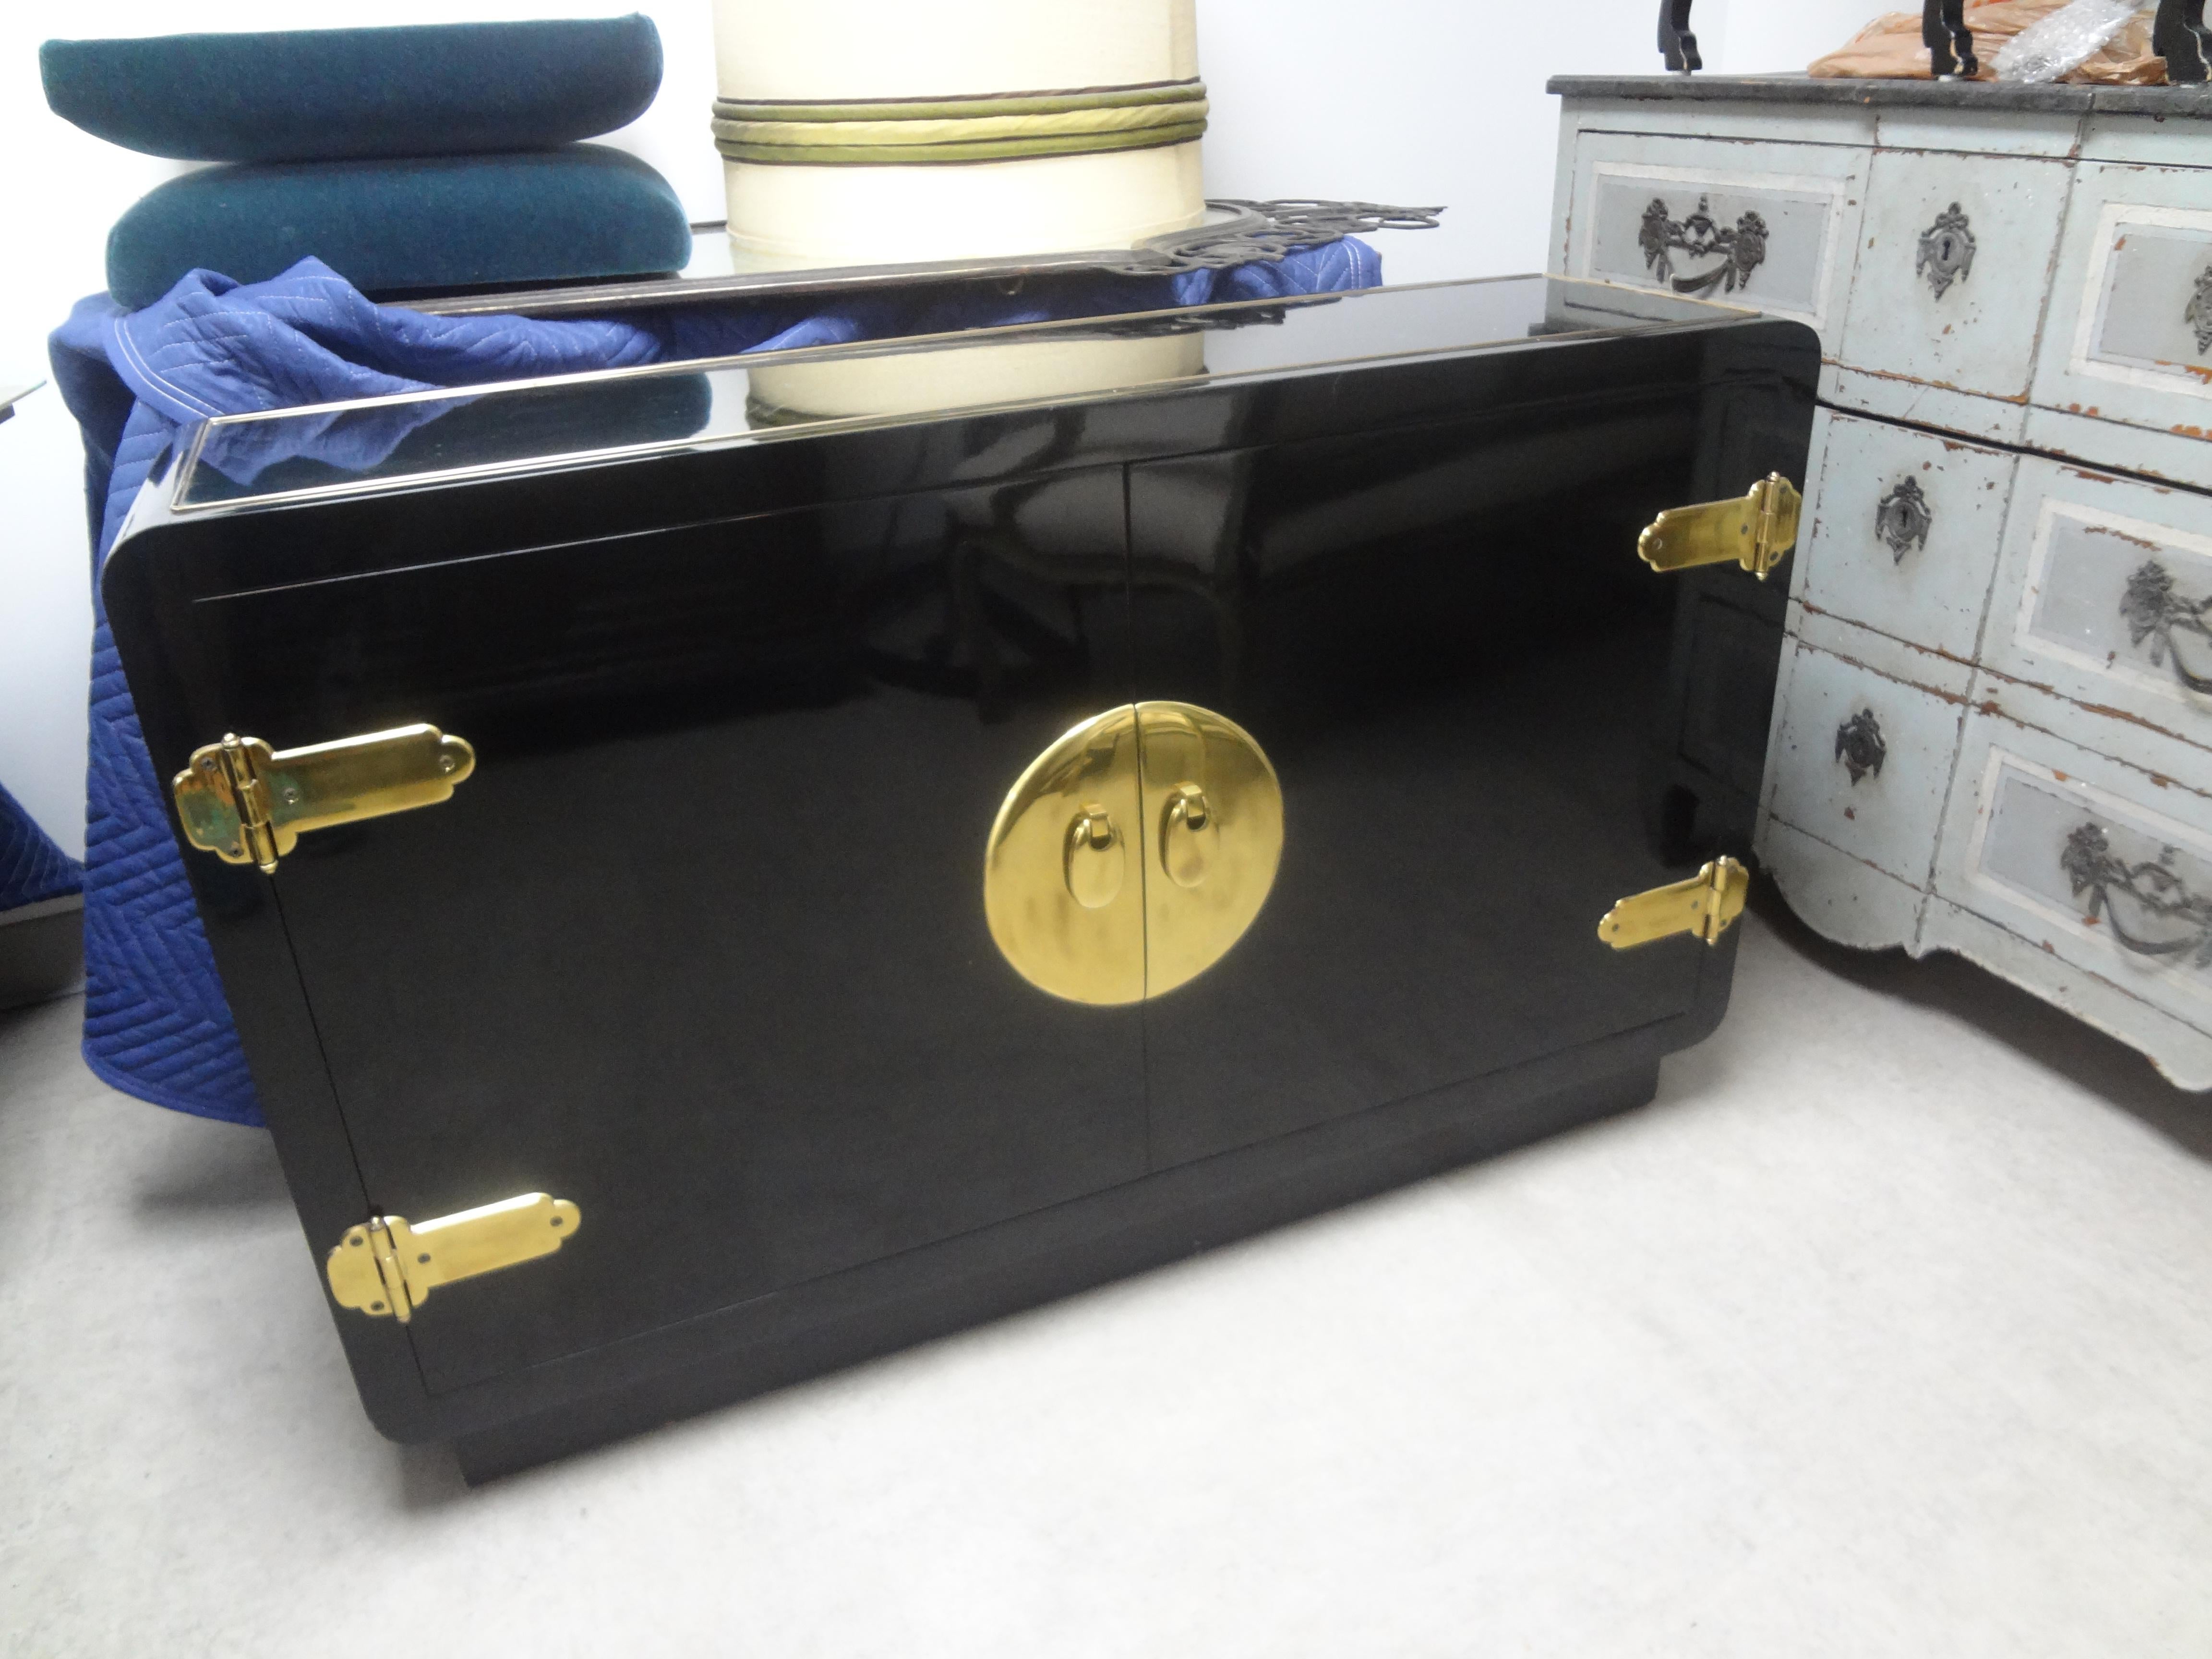 Vintage Mastercraft black lacquered credenza with brass fittings. This stunning postmodern credenza, sideboard or buffet is a great narrow depth for hard to accommodate areas.
Stunning!